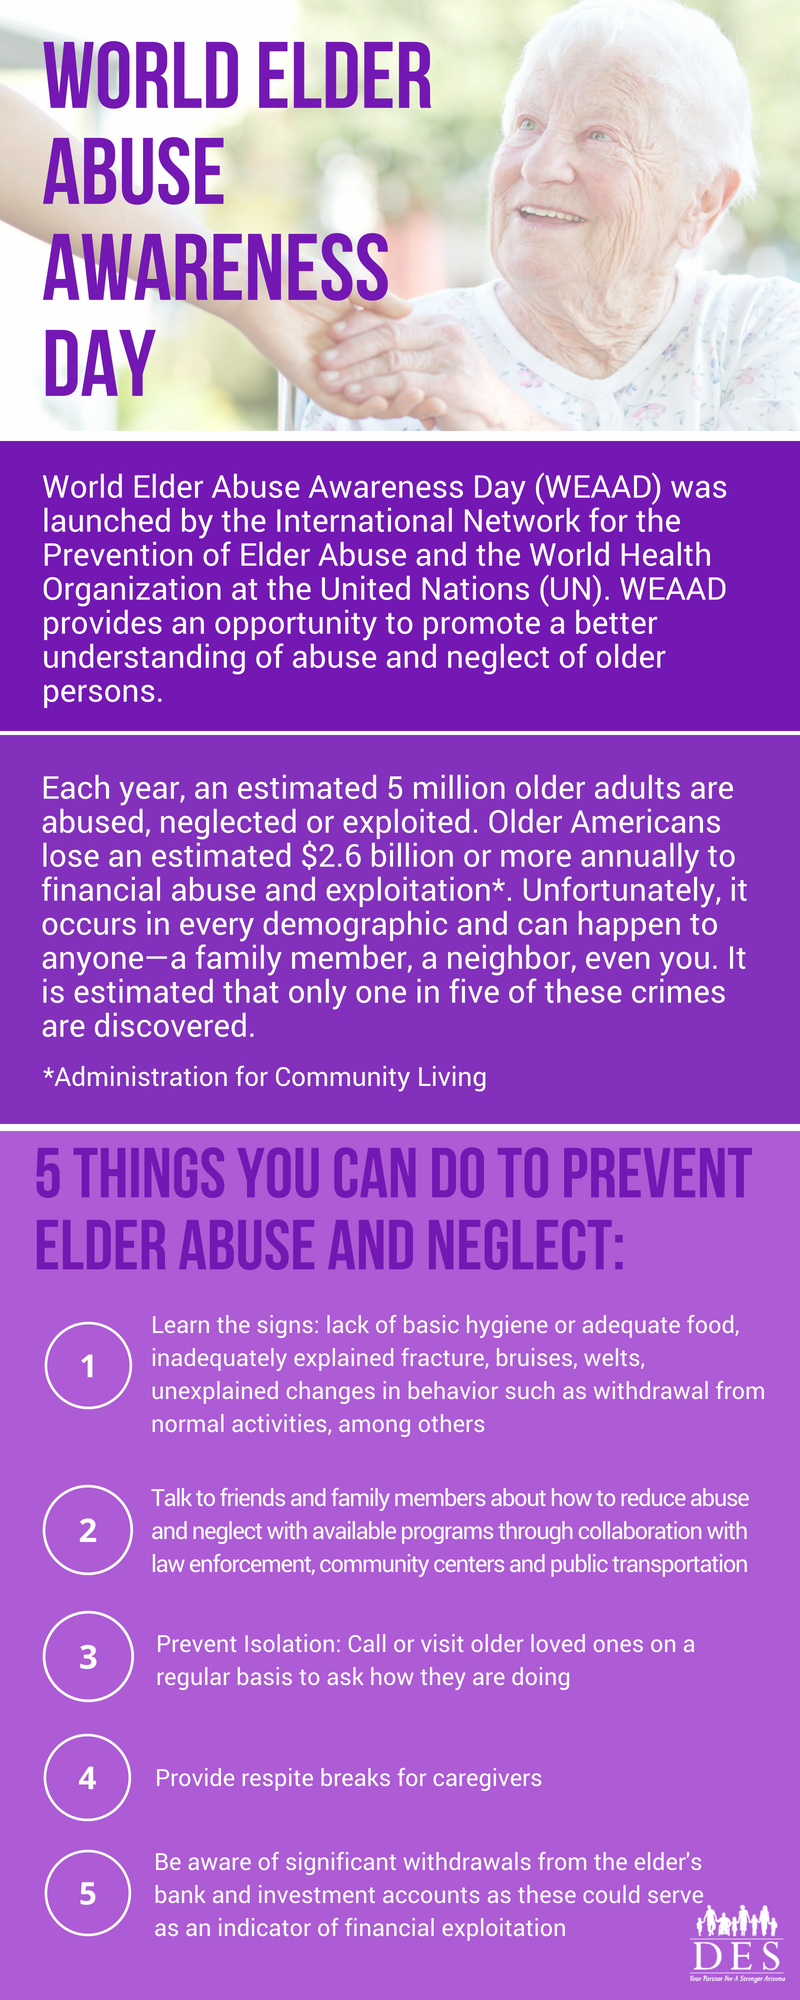 Facts and information about World Elder Abuse Awareness Day